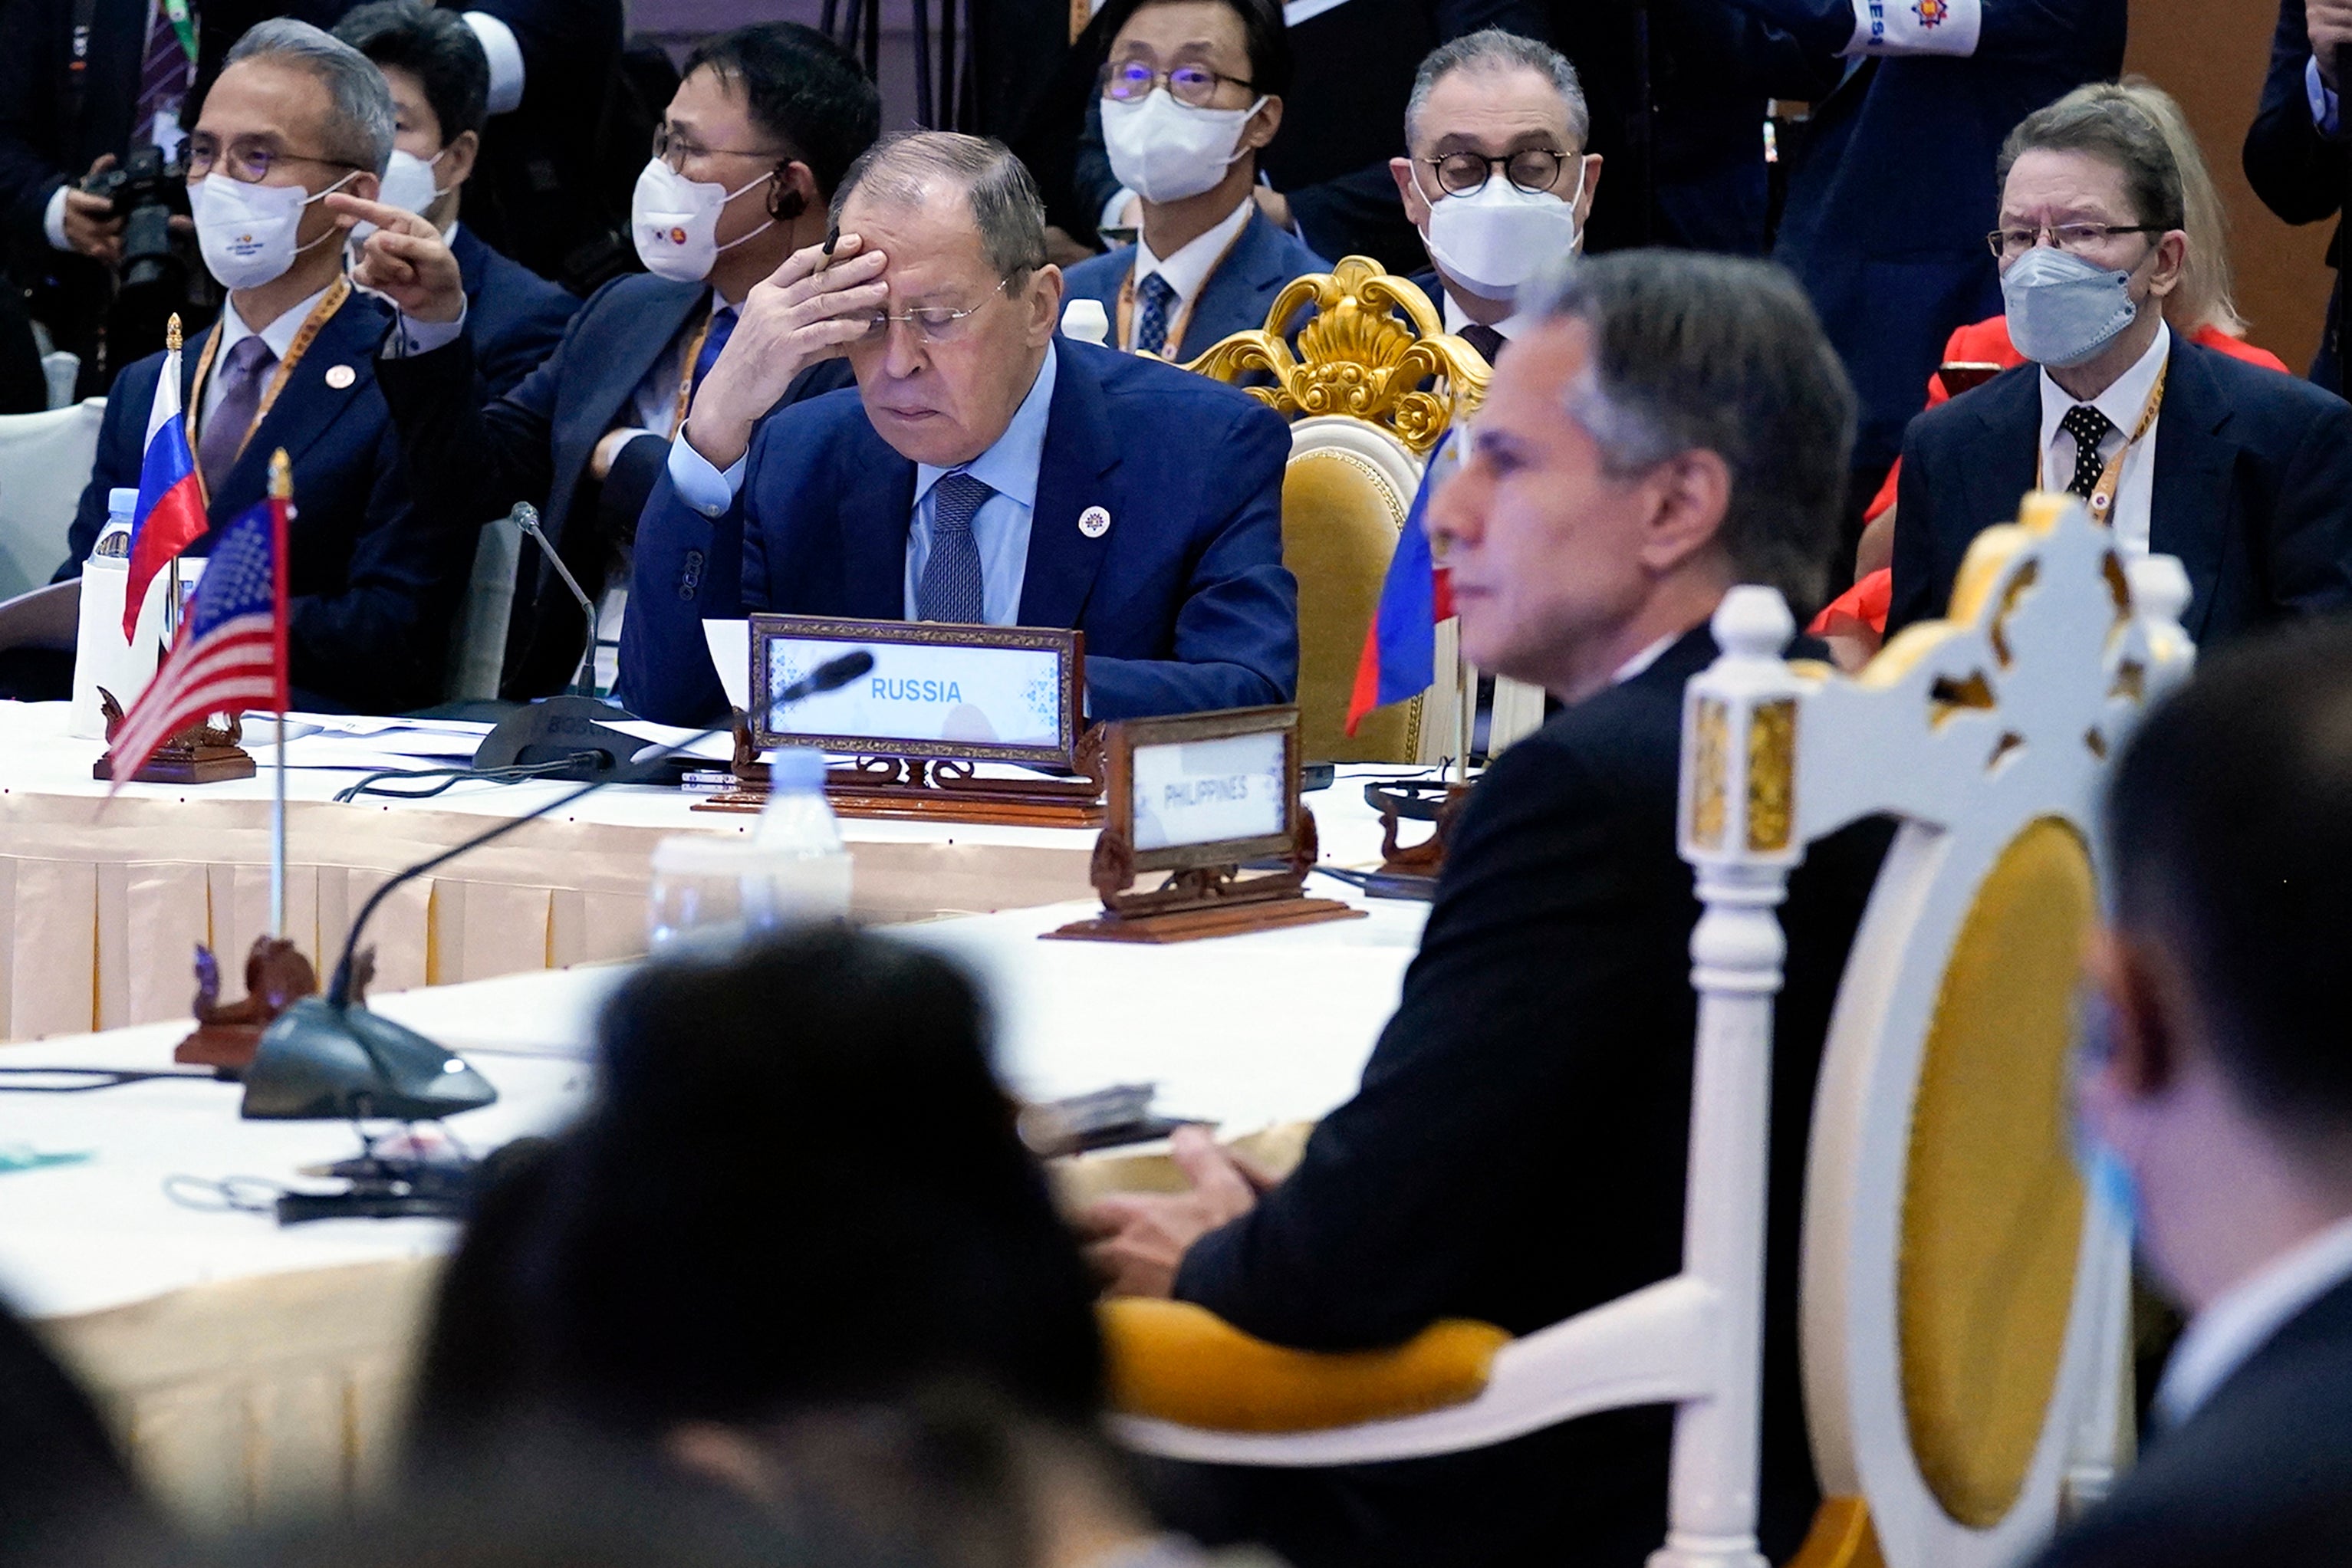 Russia’s Foreign Minister Sergey Lavrov (L) and US Secretary of State Antony Blinken (R) attend the East Asia Summit Foreign Ministers meeting during the 55th Asean Foreign Minsters’ Meeting in Phnom Penh on 5 August 2022